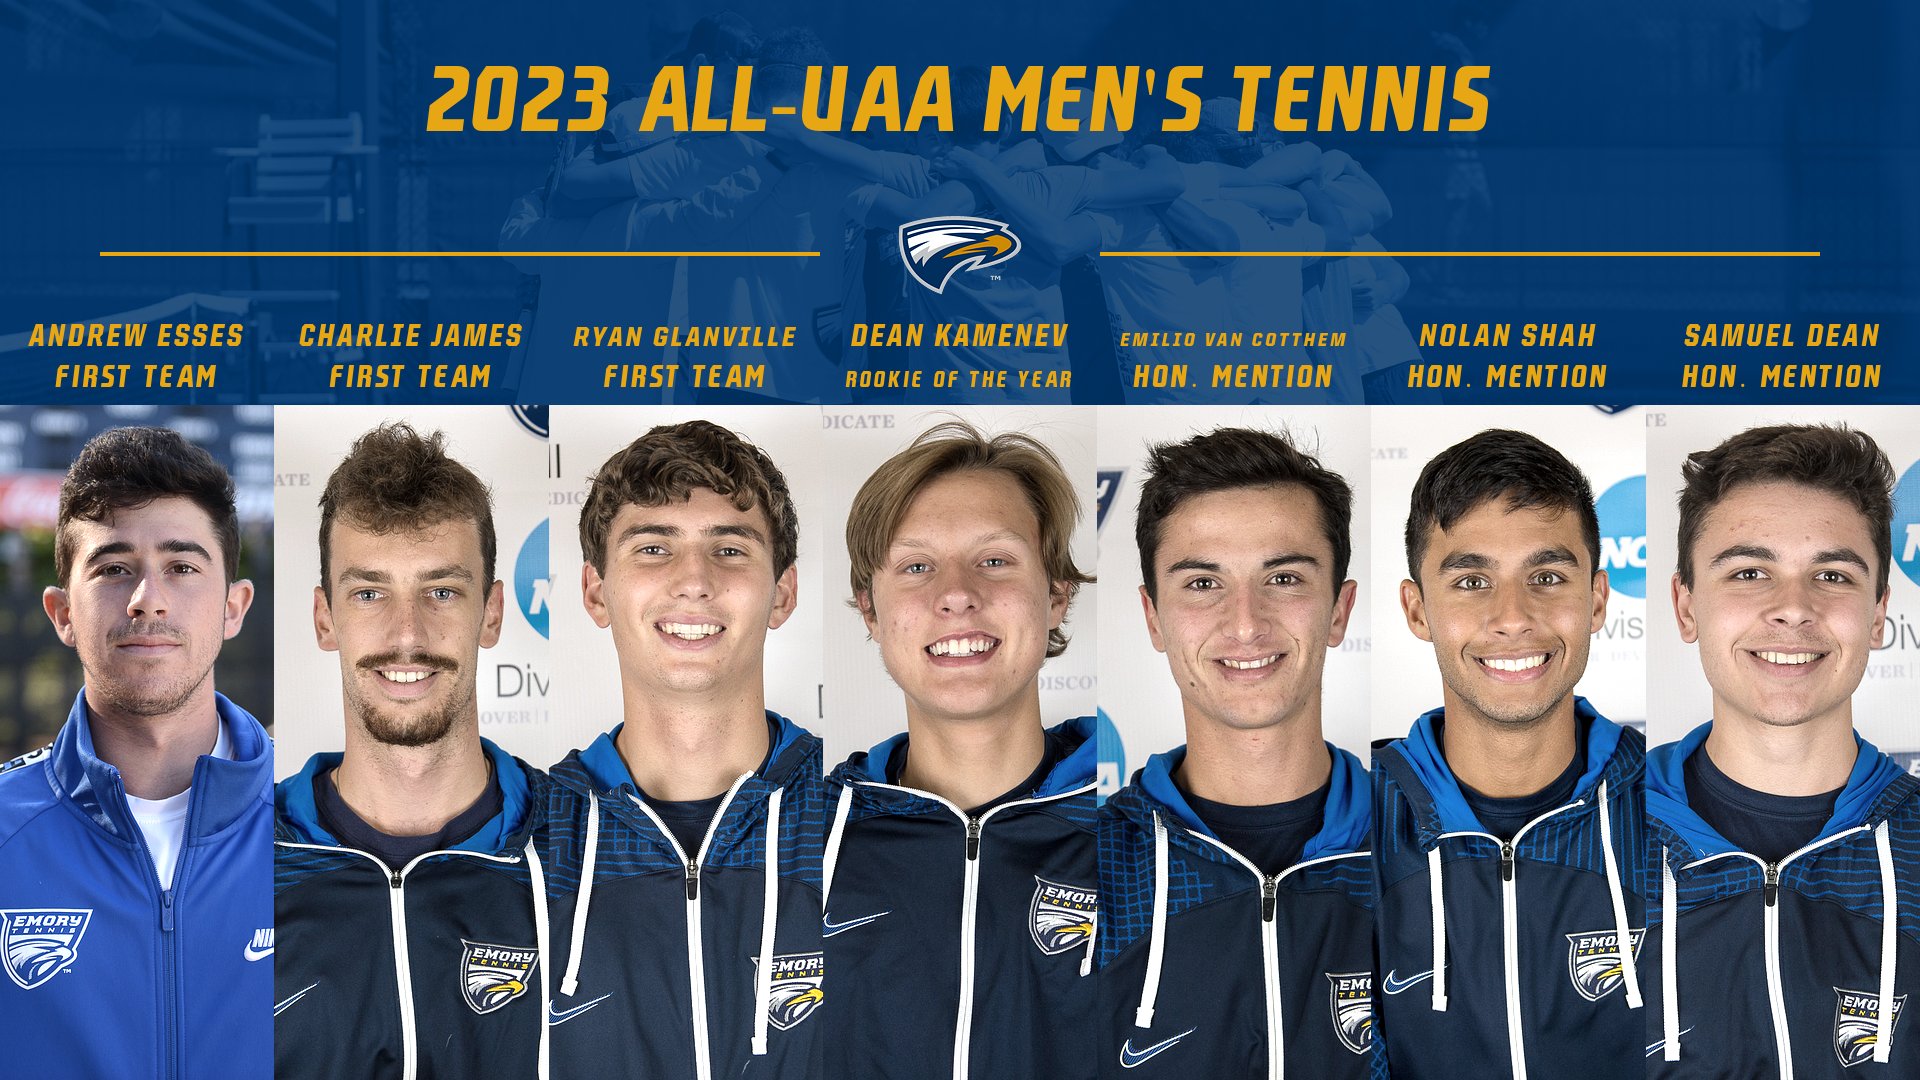 Seven From Men's Tennis Honored on All-UAA Team; Kamenev Named Rookie of the Year